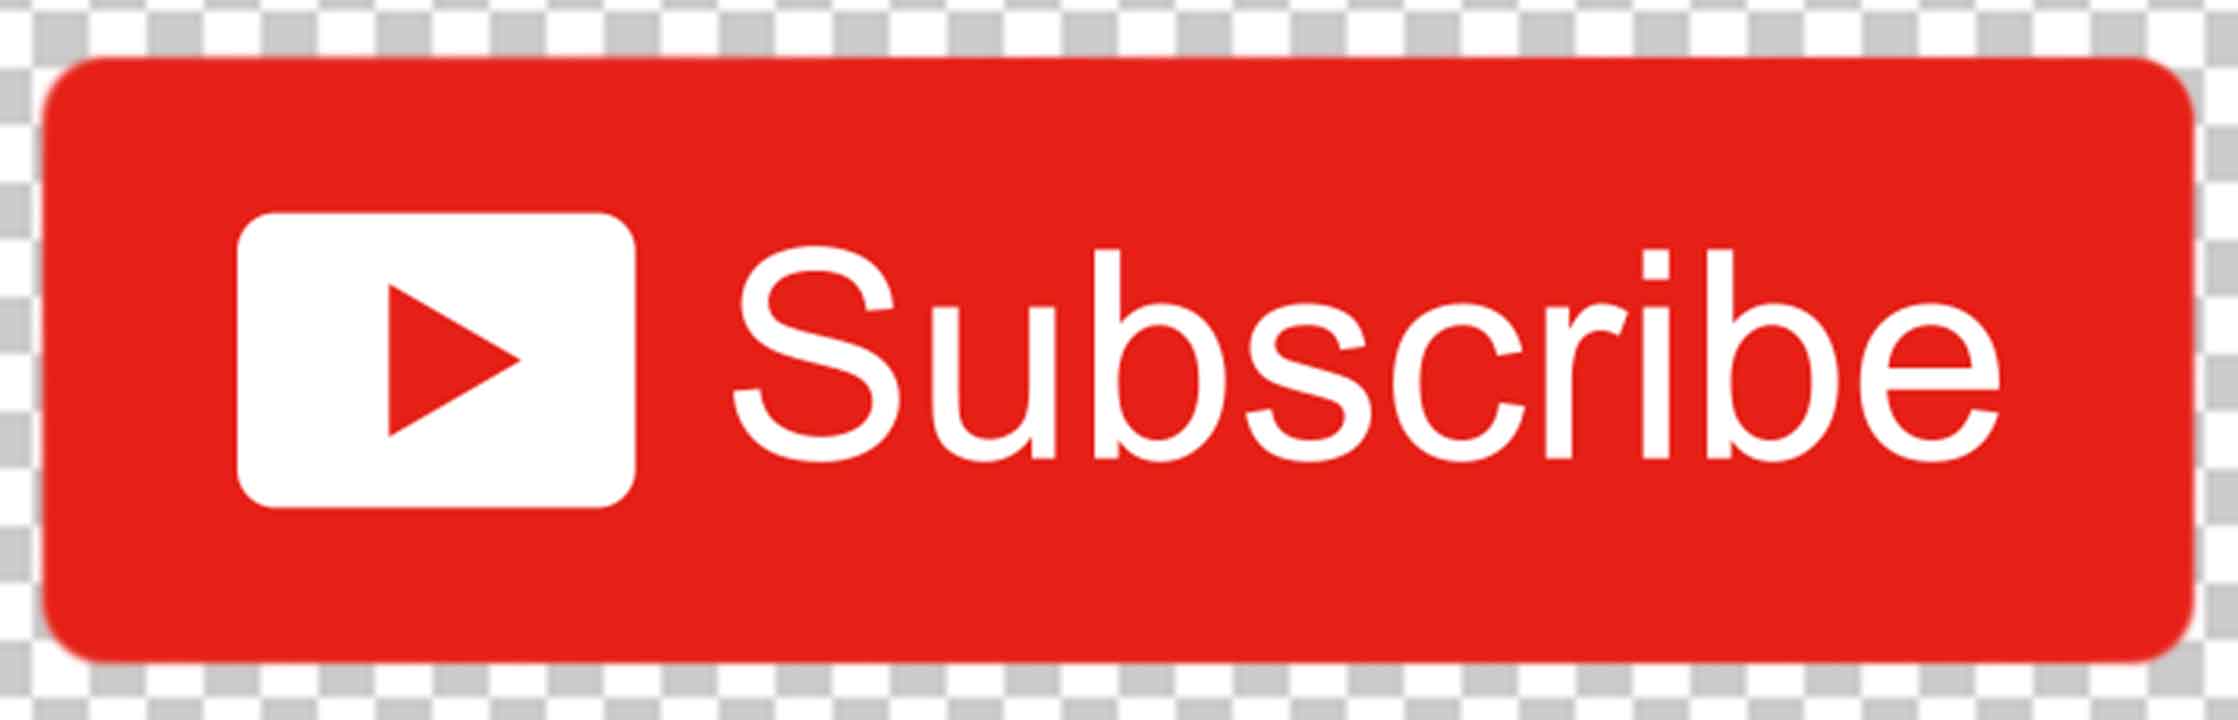 Subscribe Button Transparent Background Photo Free Download